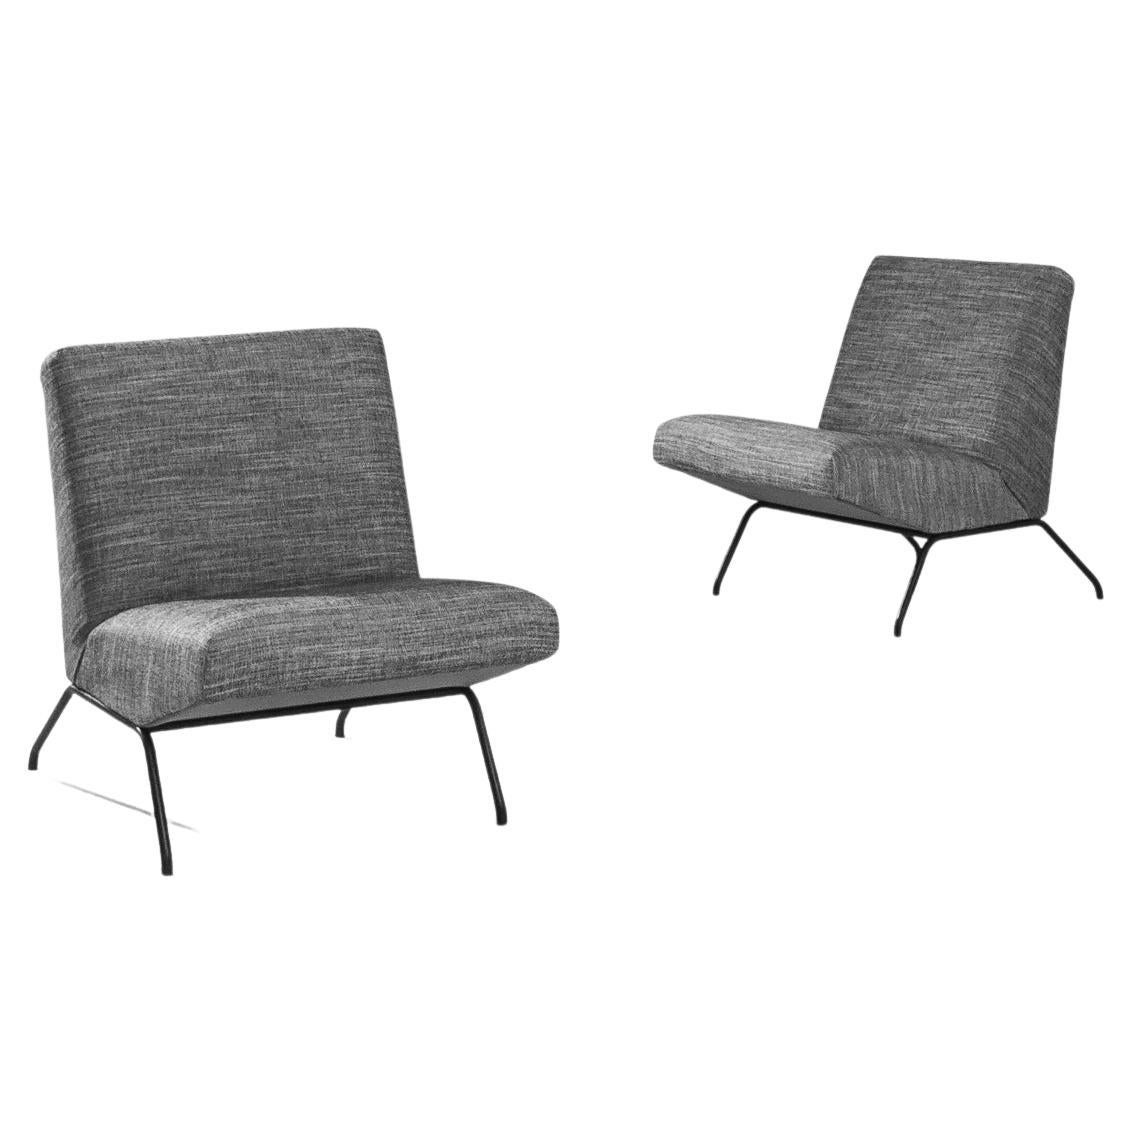 Mid-Century Modern French Armchairs in Grey Upholstery, a Pair